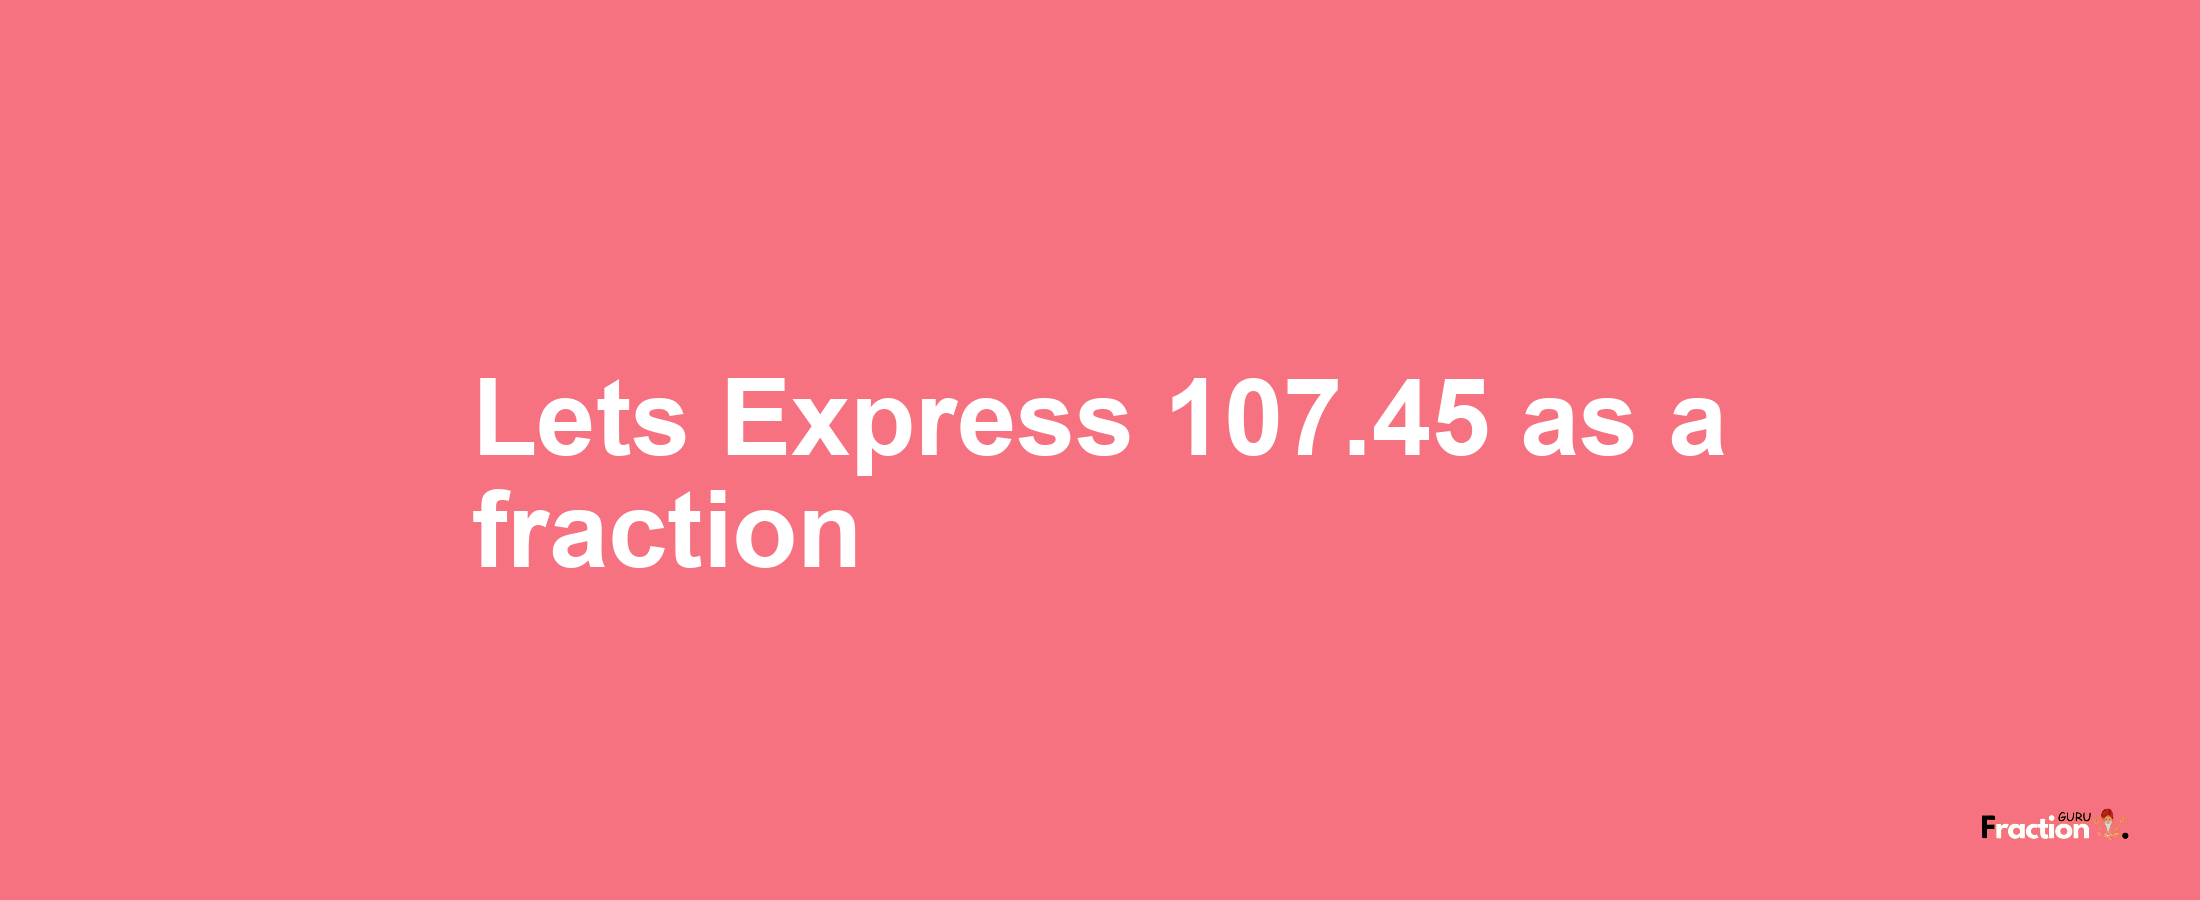 Lets Express 107.45 as afraction